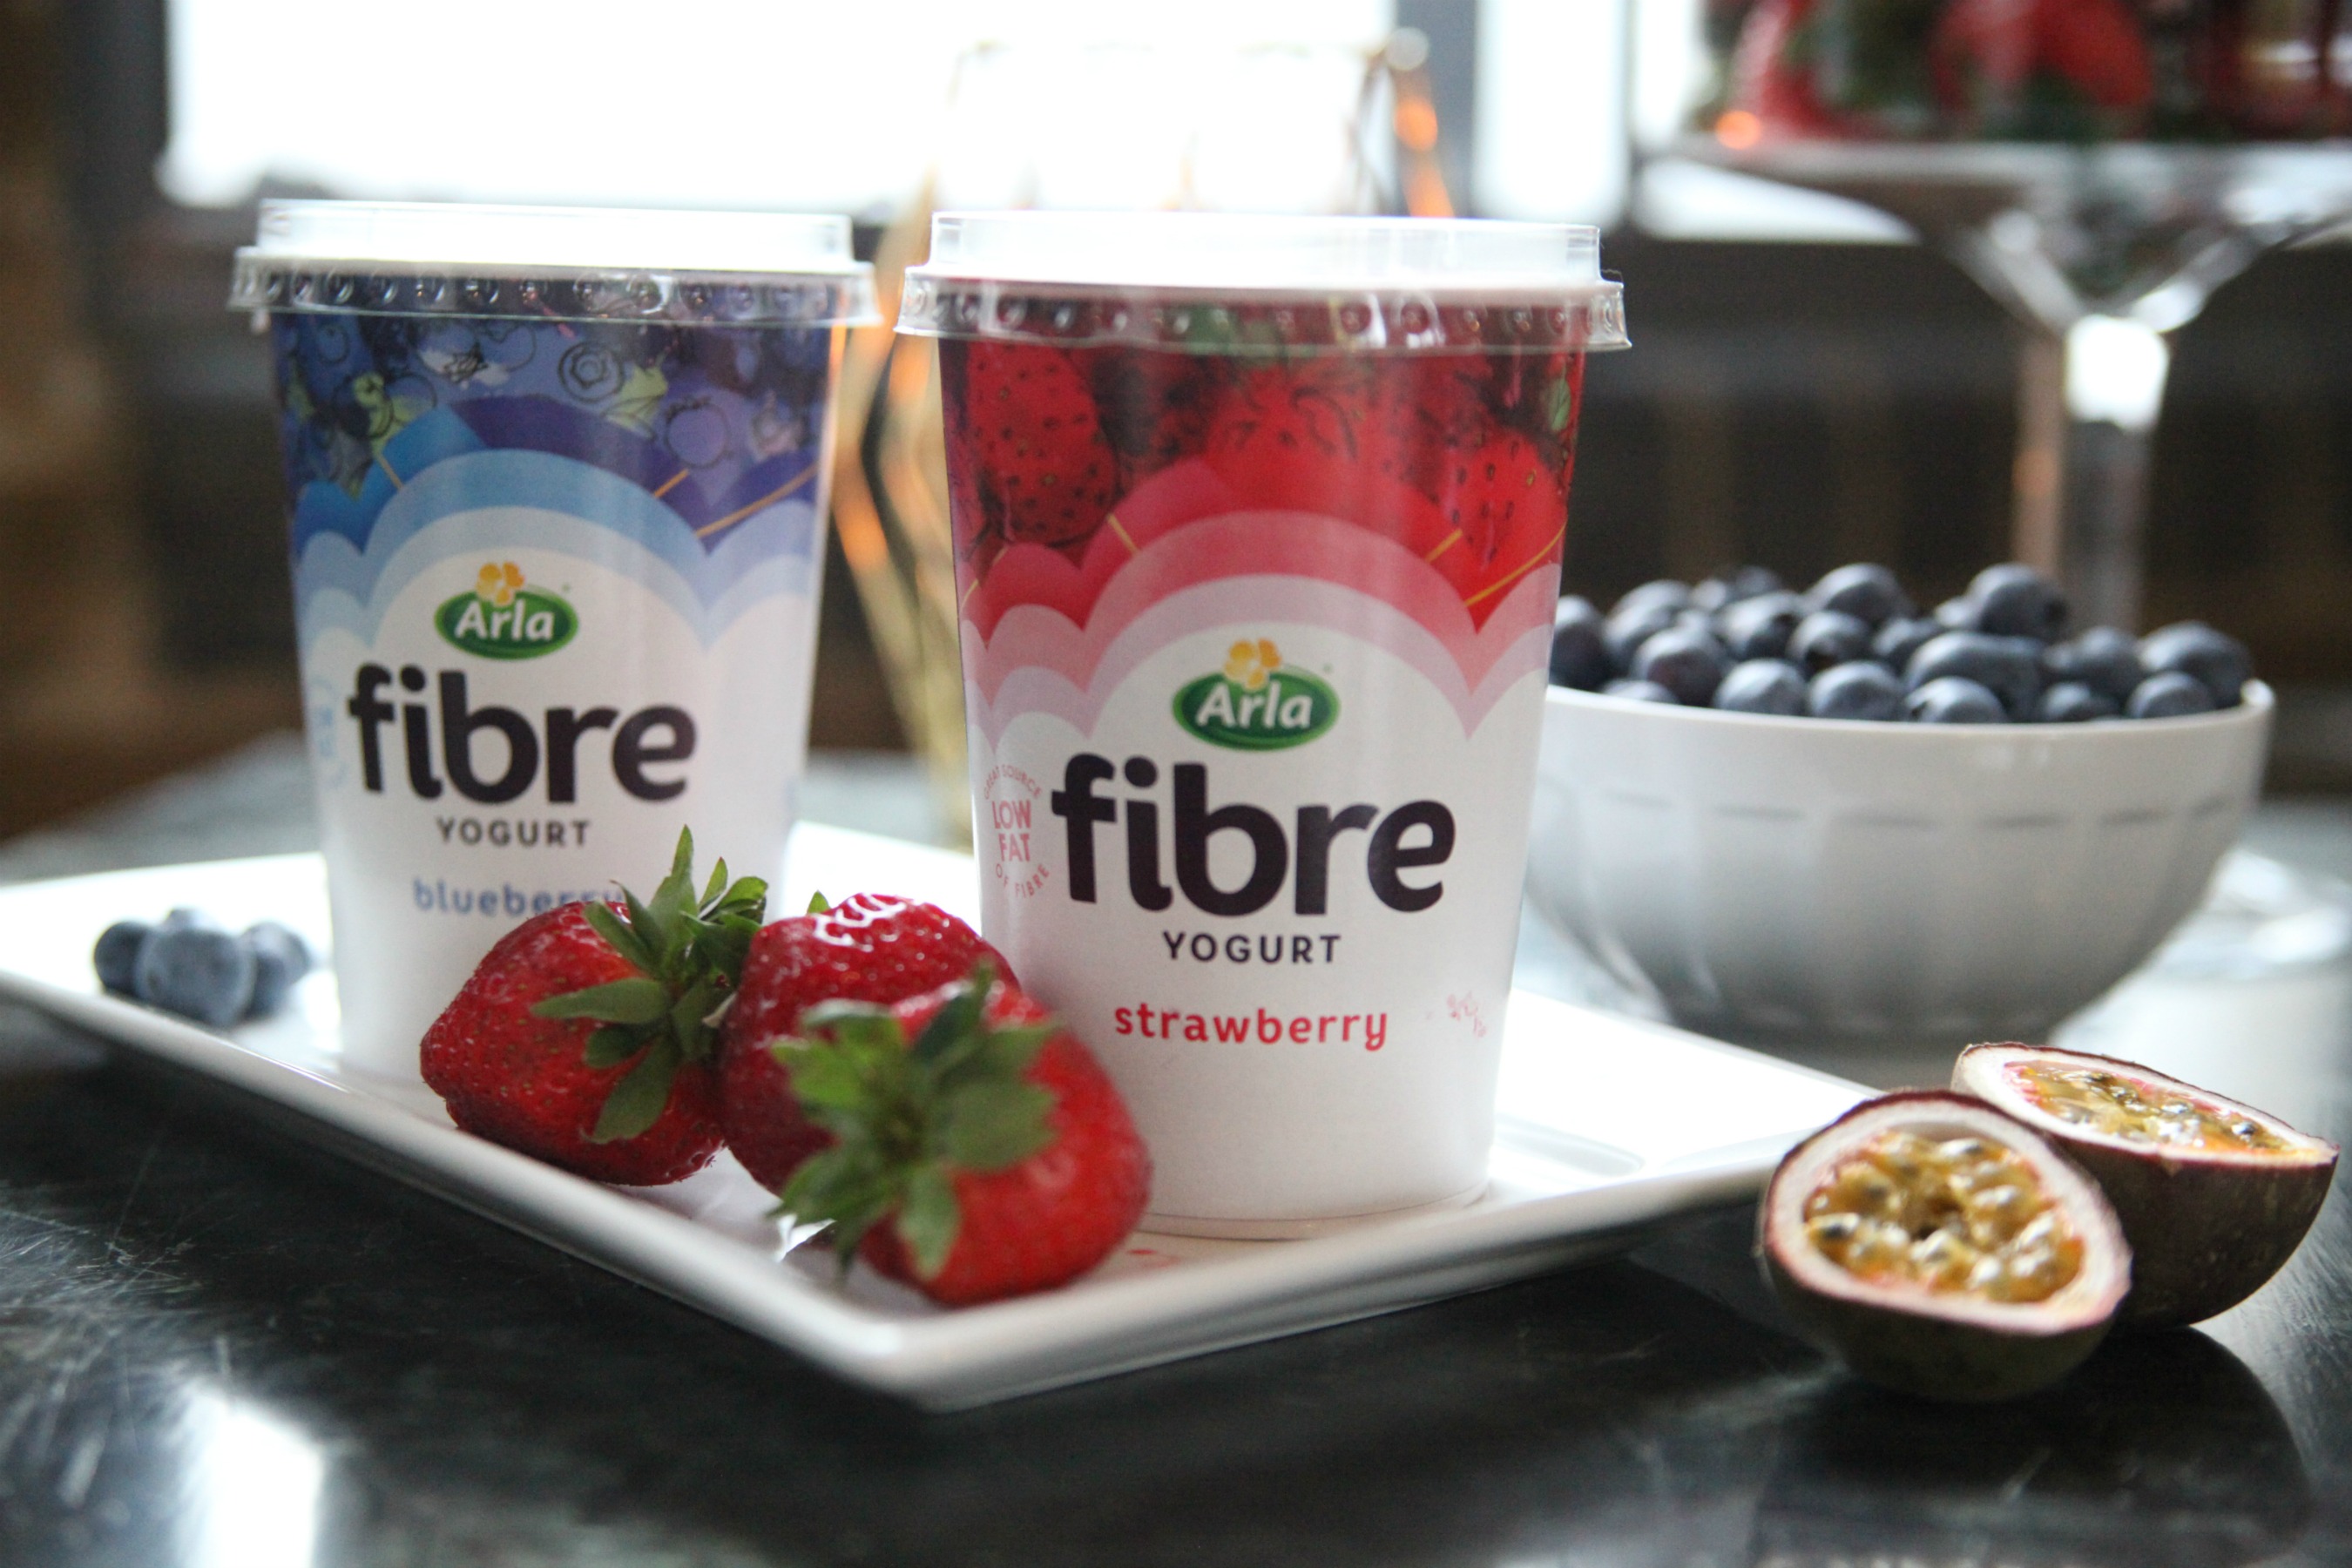 New Arla Fibre pots with strawberry and blueberry